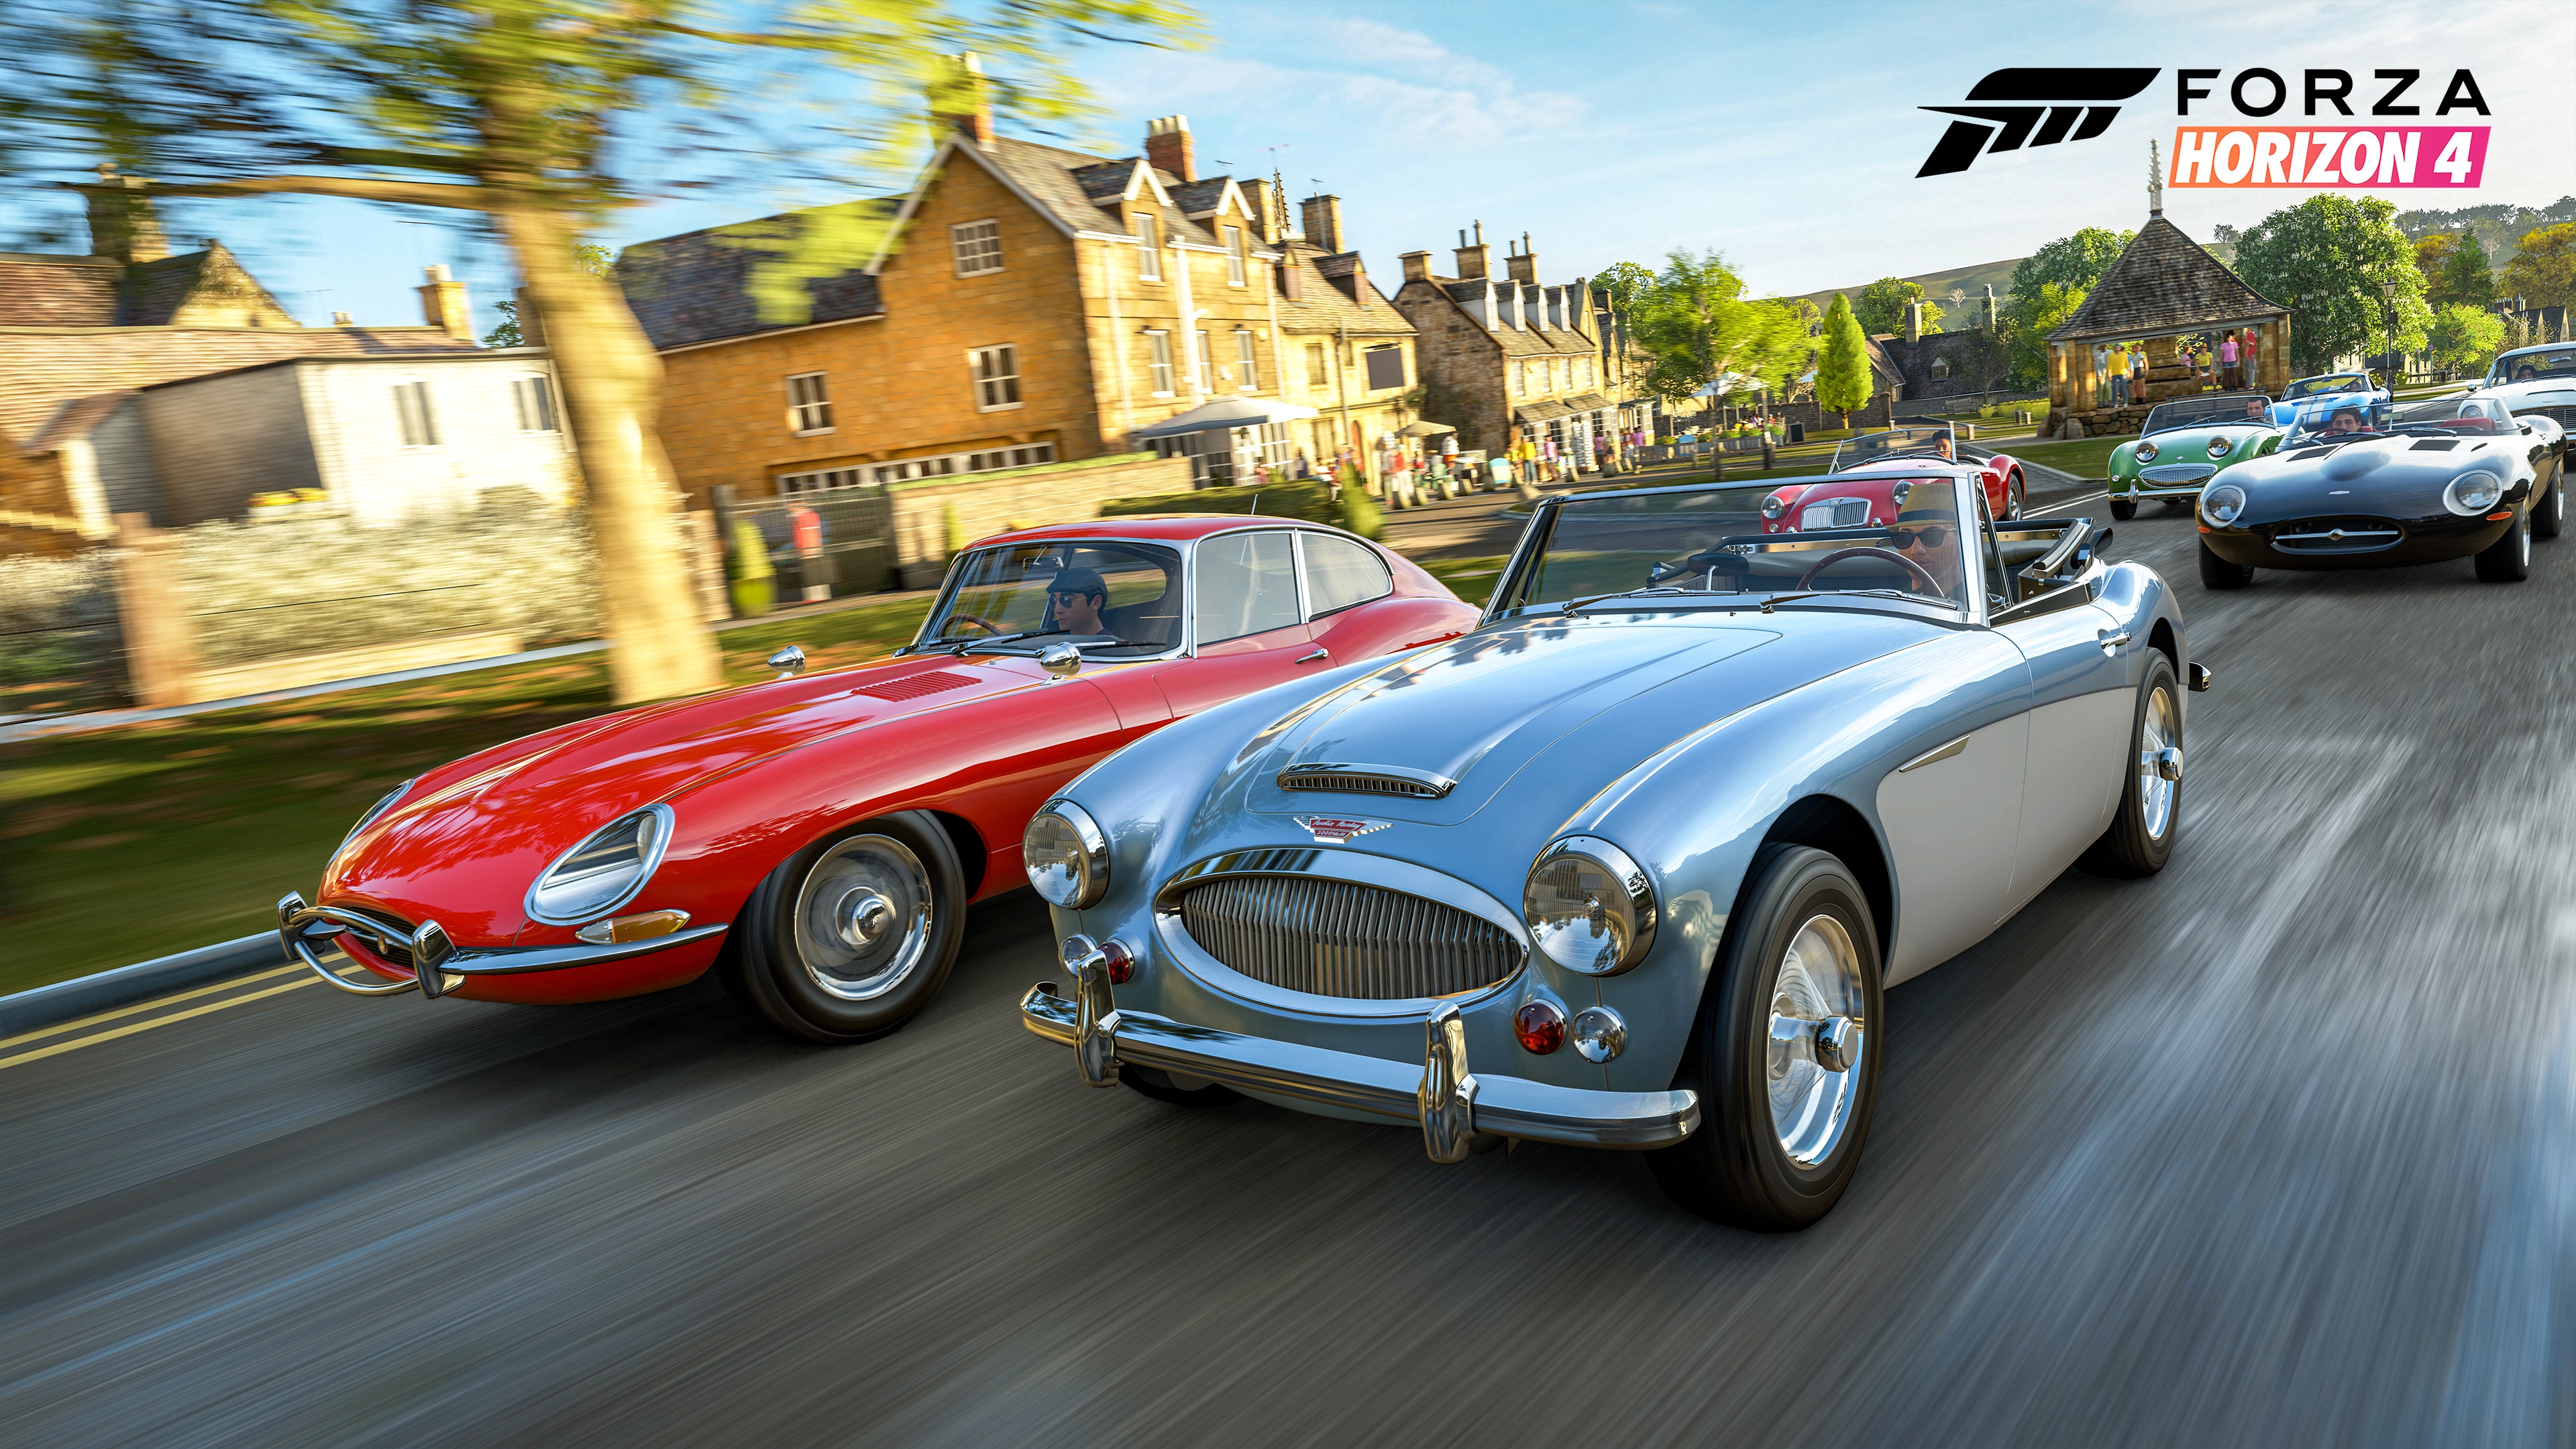 Image for Forza Horizon 4 looks rather lovely and wet in the spring